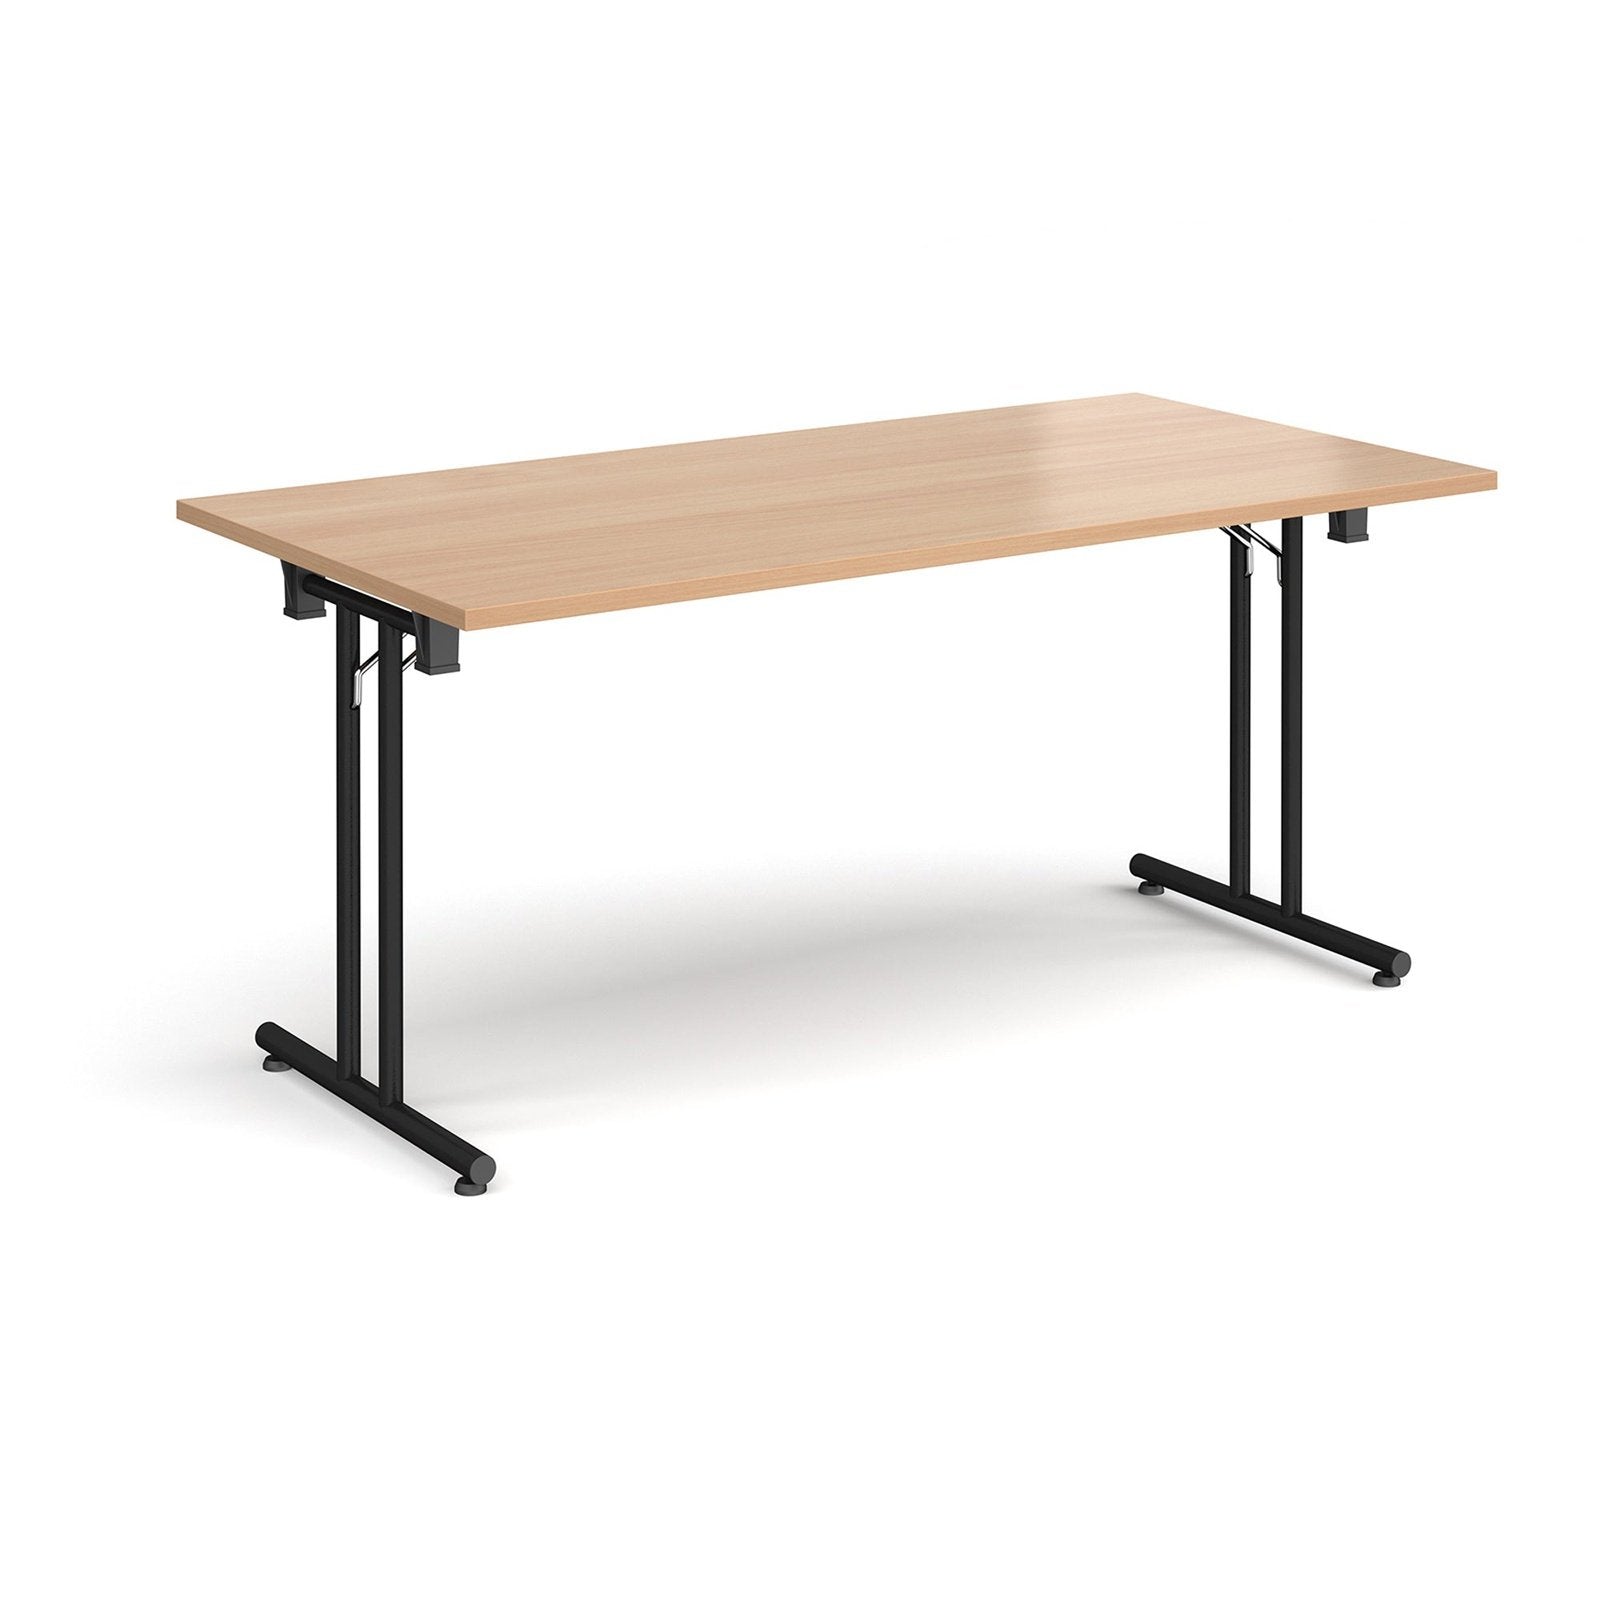 Rectangular folding leg table - Office Products Online